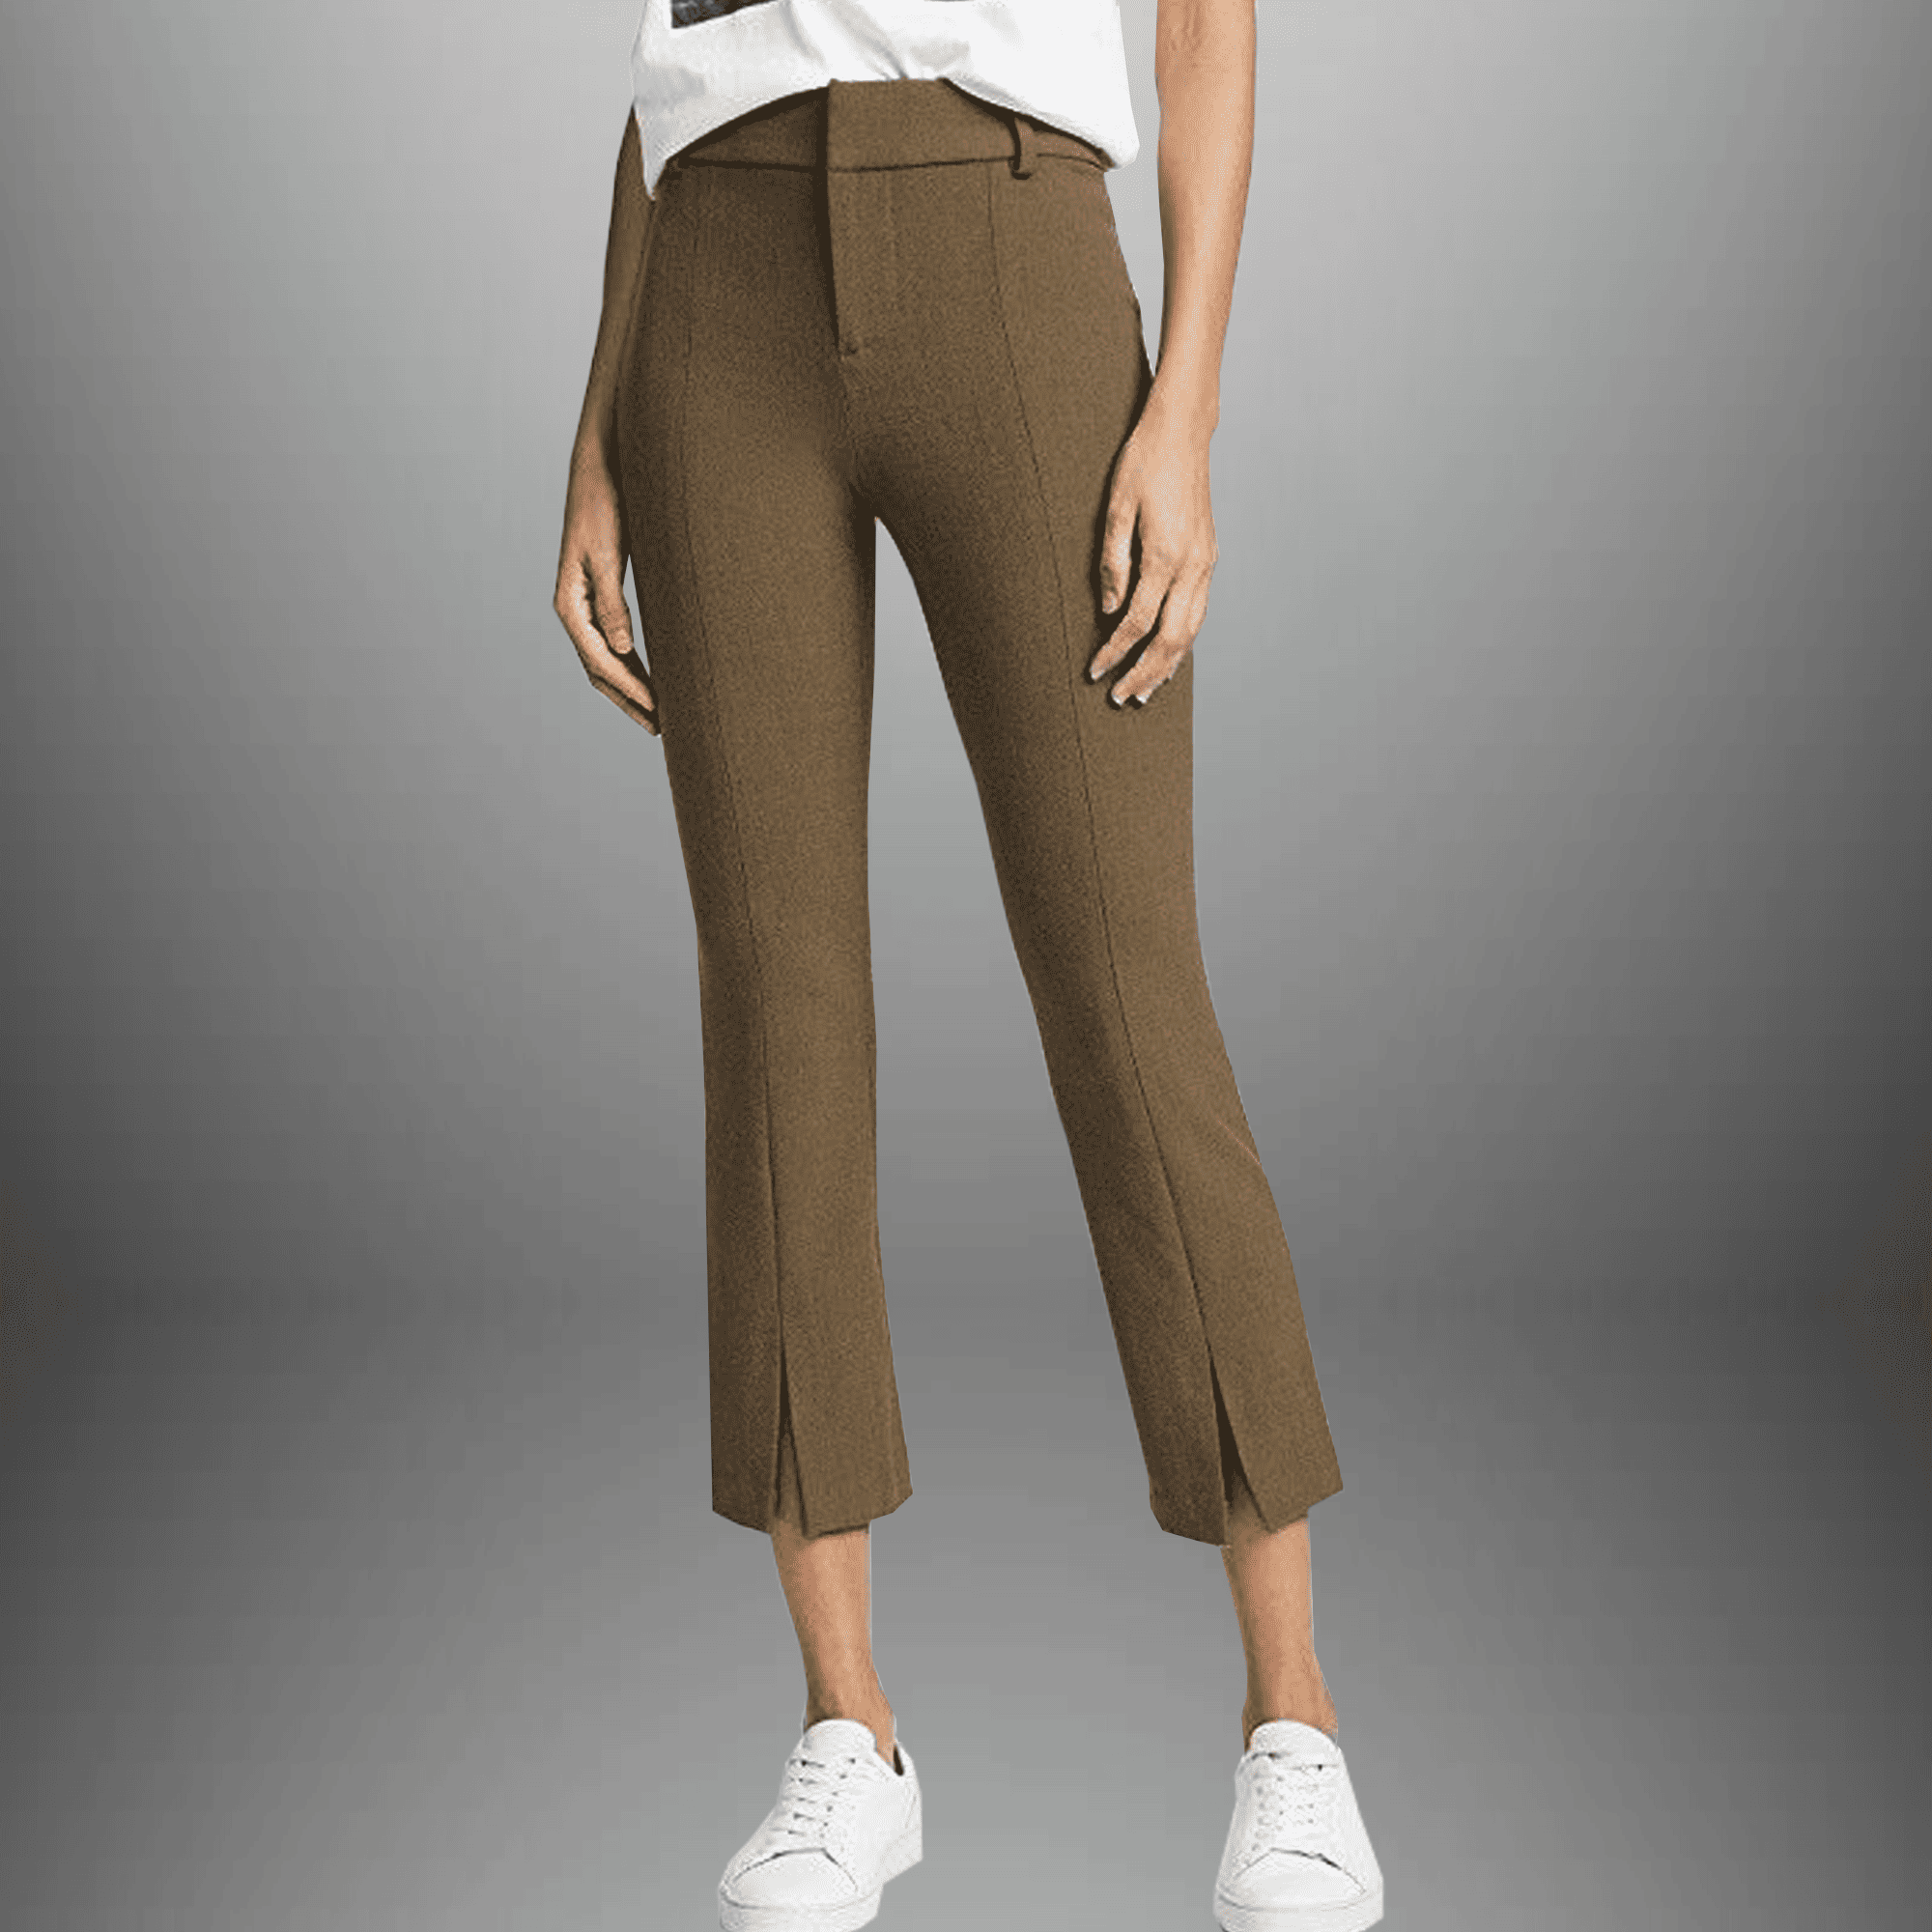 Women's front cut tan brown stretchable casual pants-RCP027